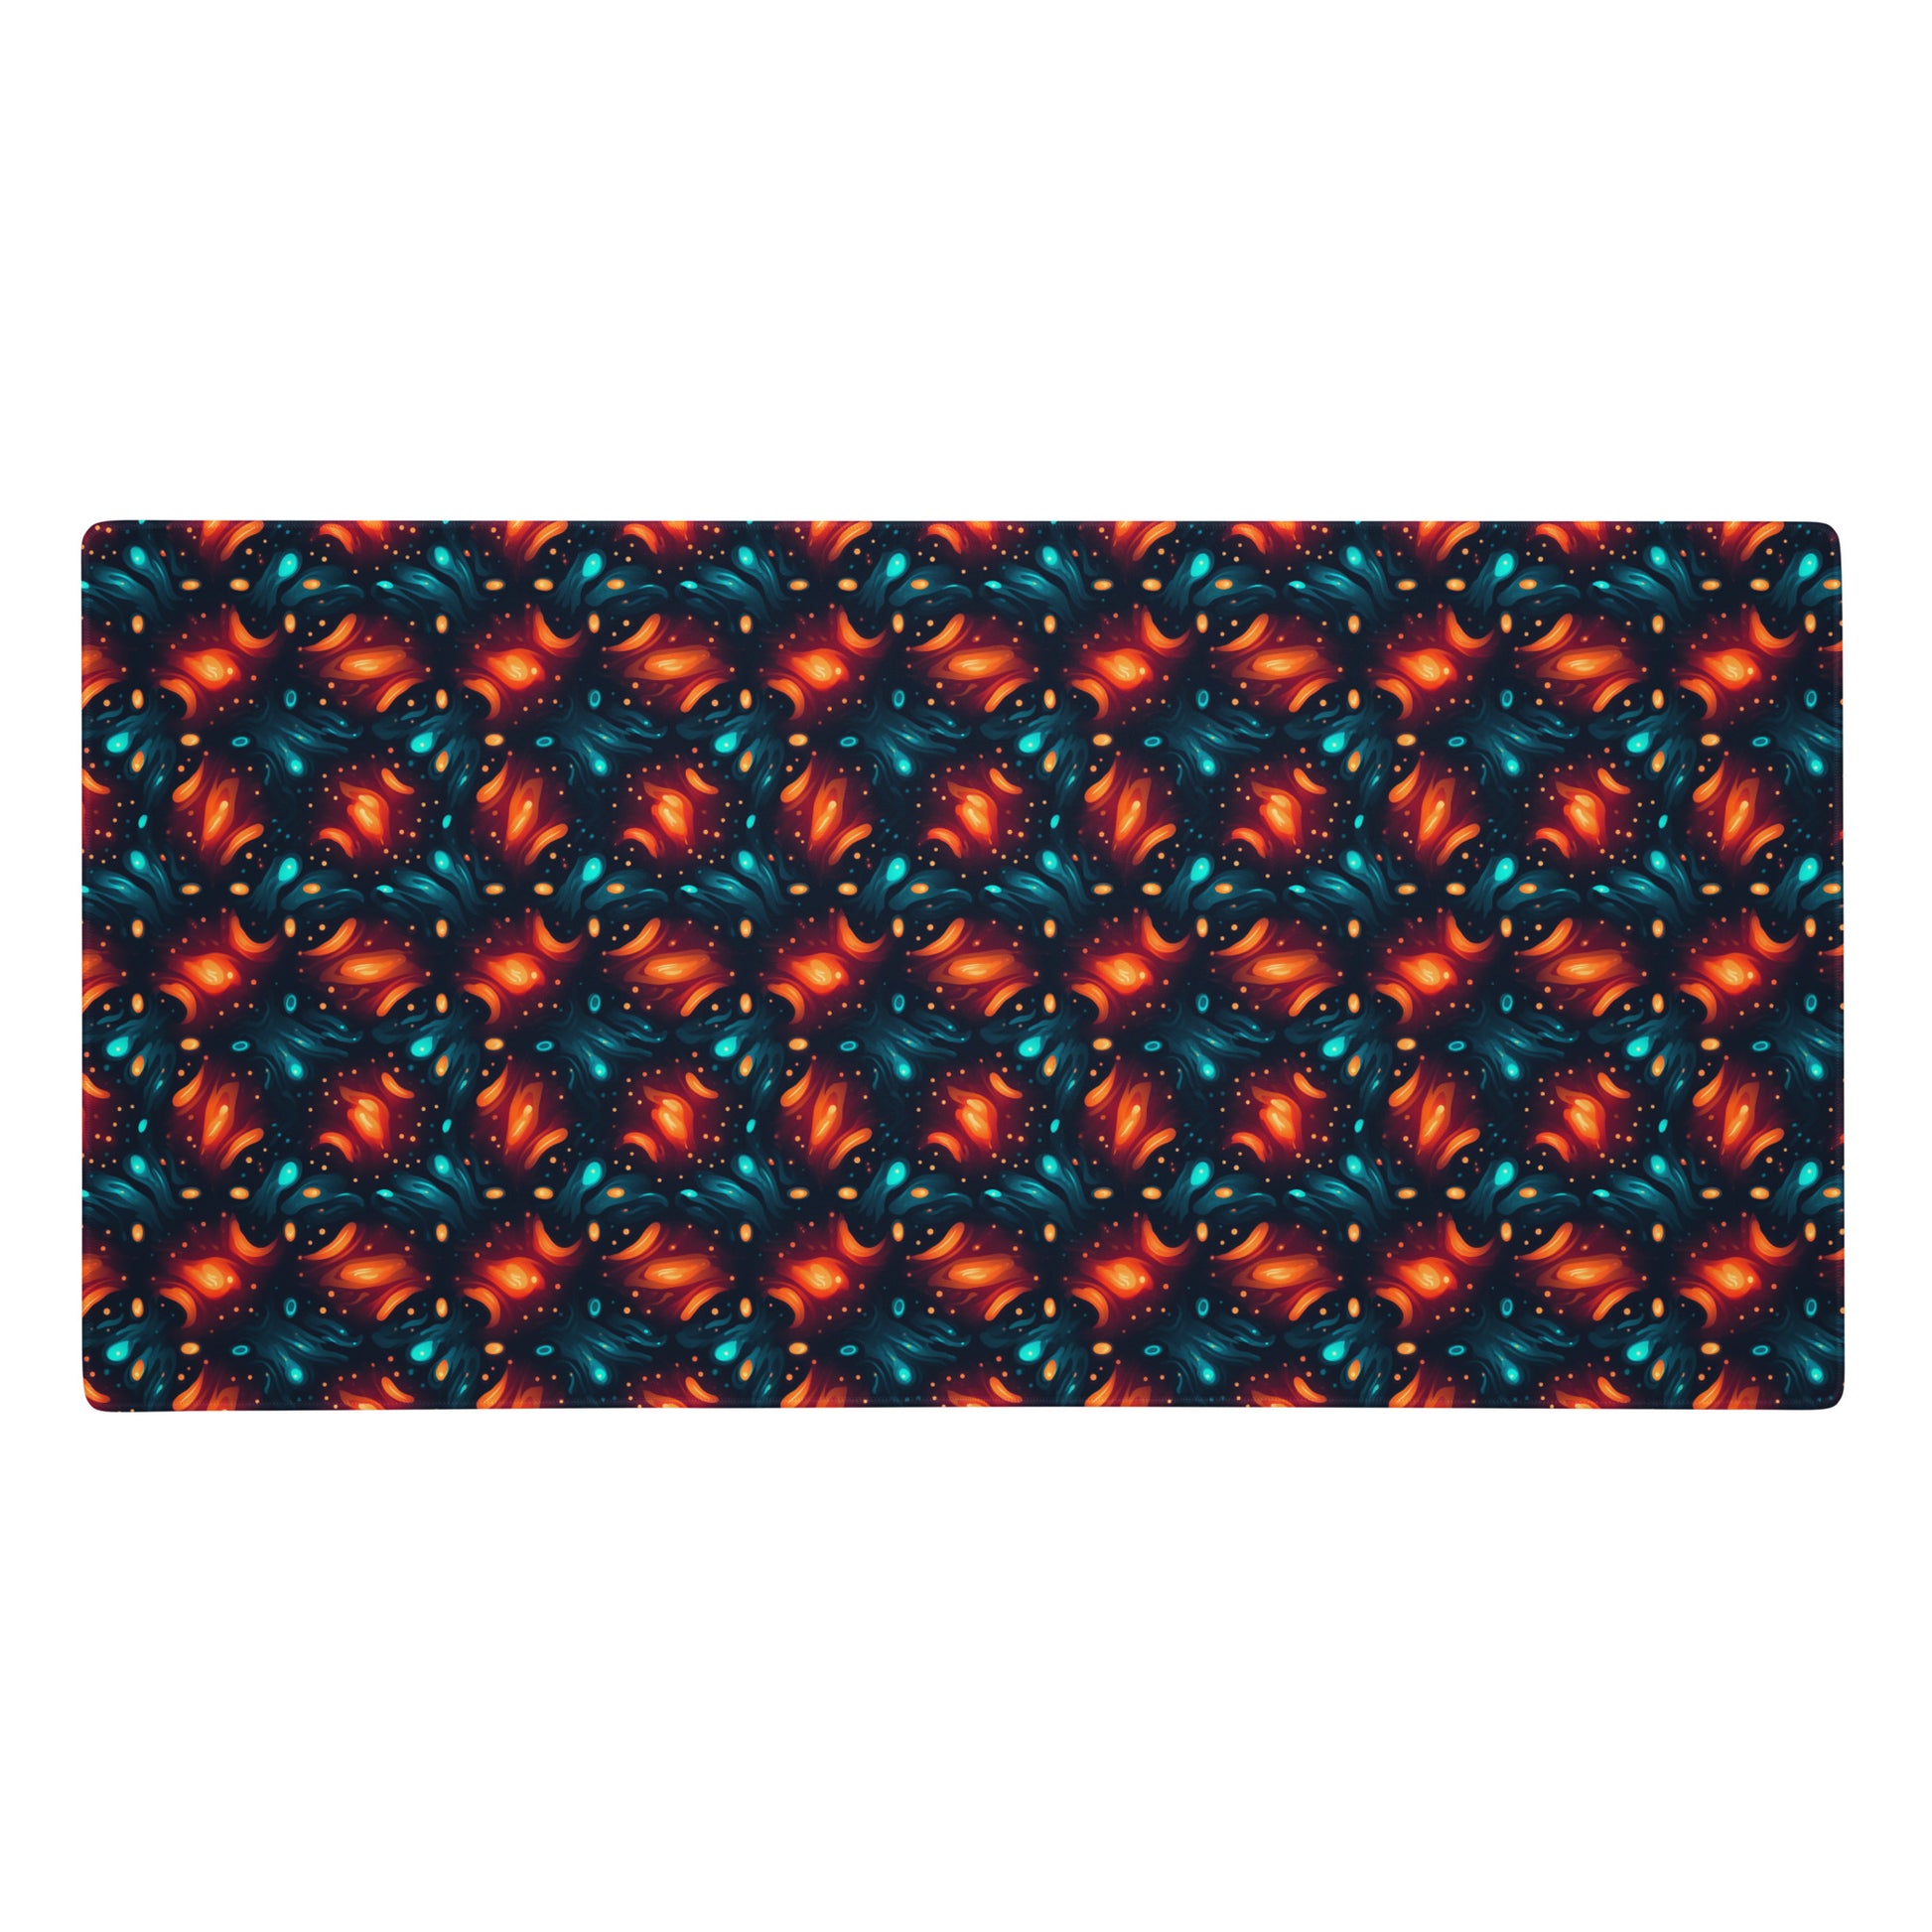 A 36" x 18" desk pad with a blue and orange abstract cross hatch pattern.